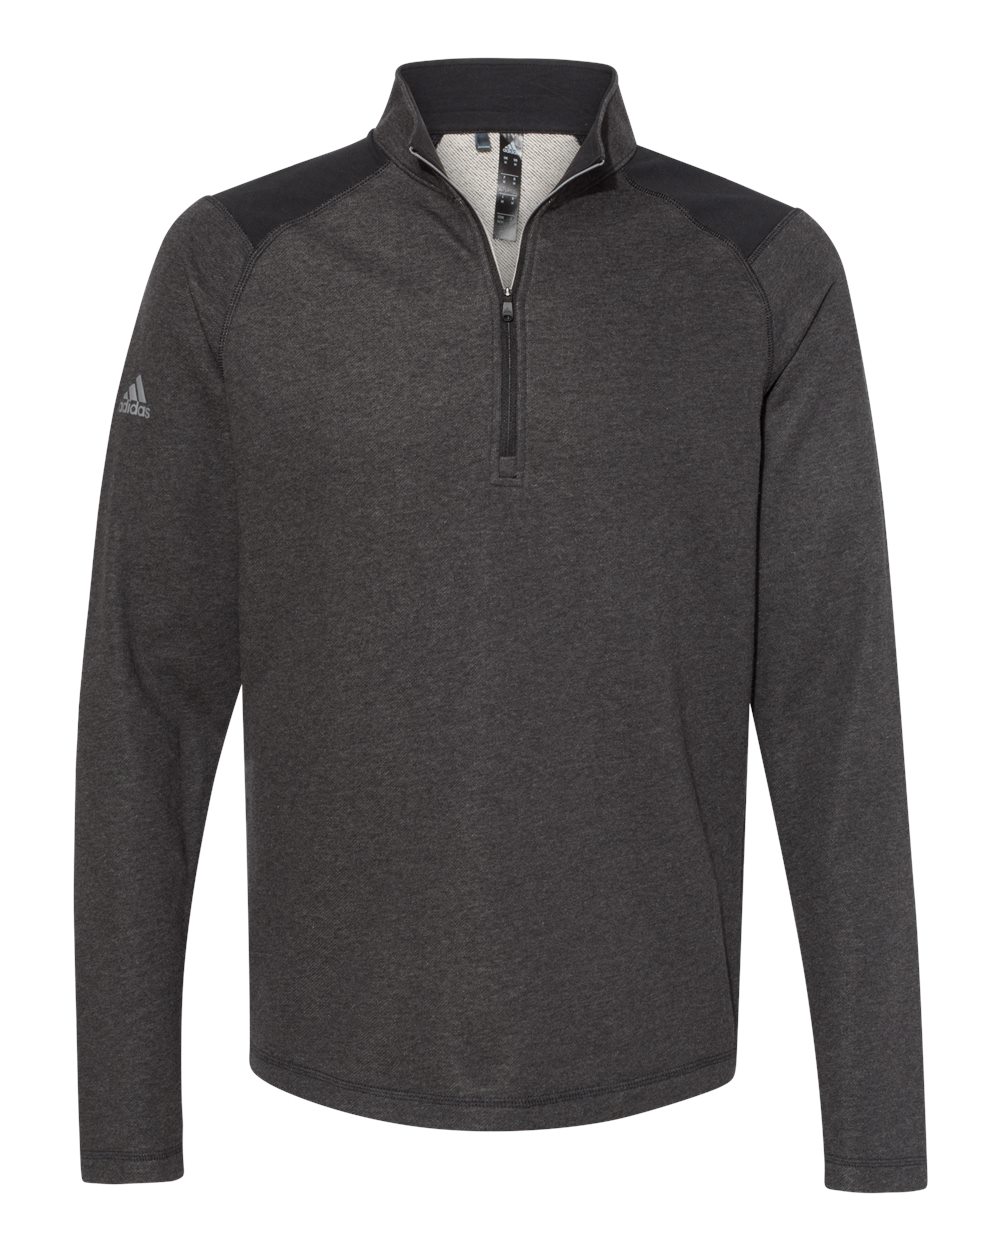 Adidas A463 - Heathered Quarter Zip Pullover with Colorblocked Shoulders